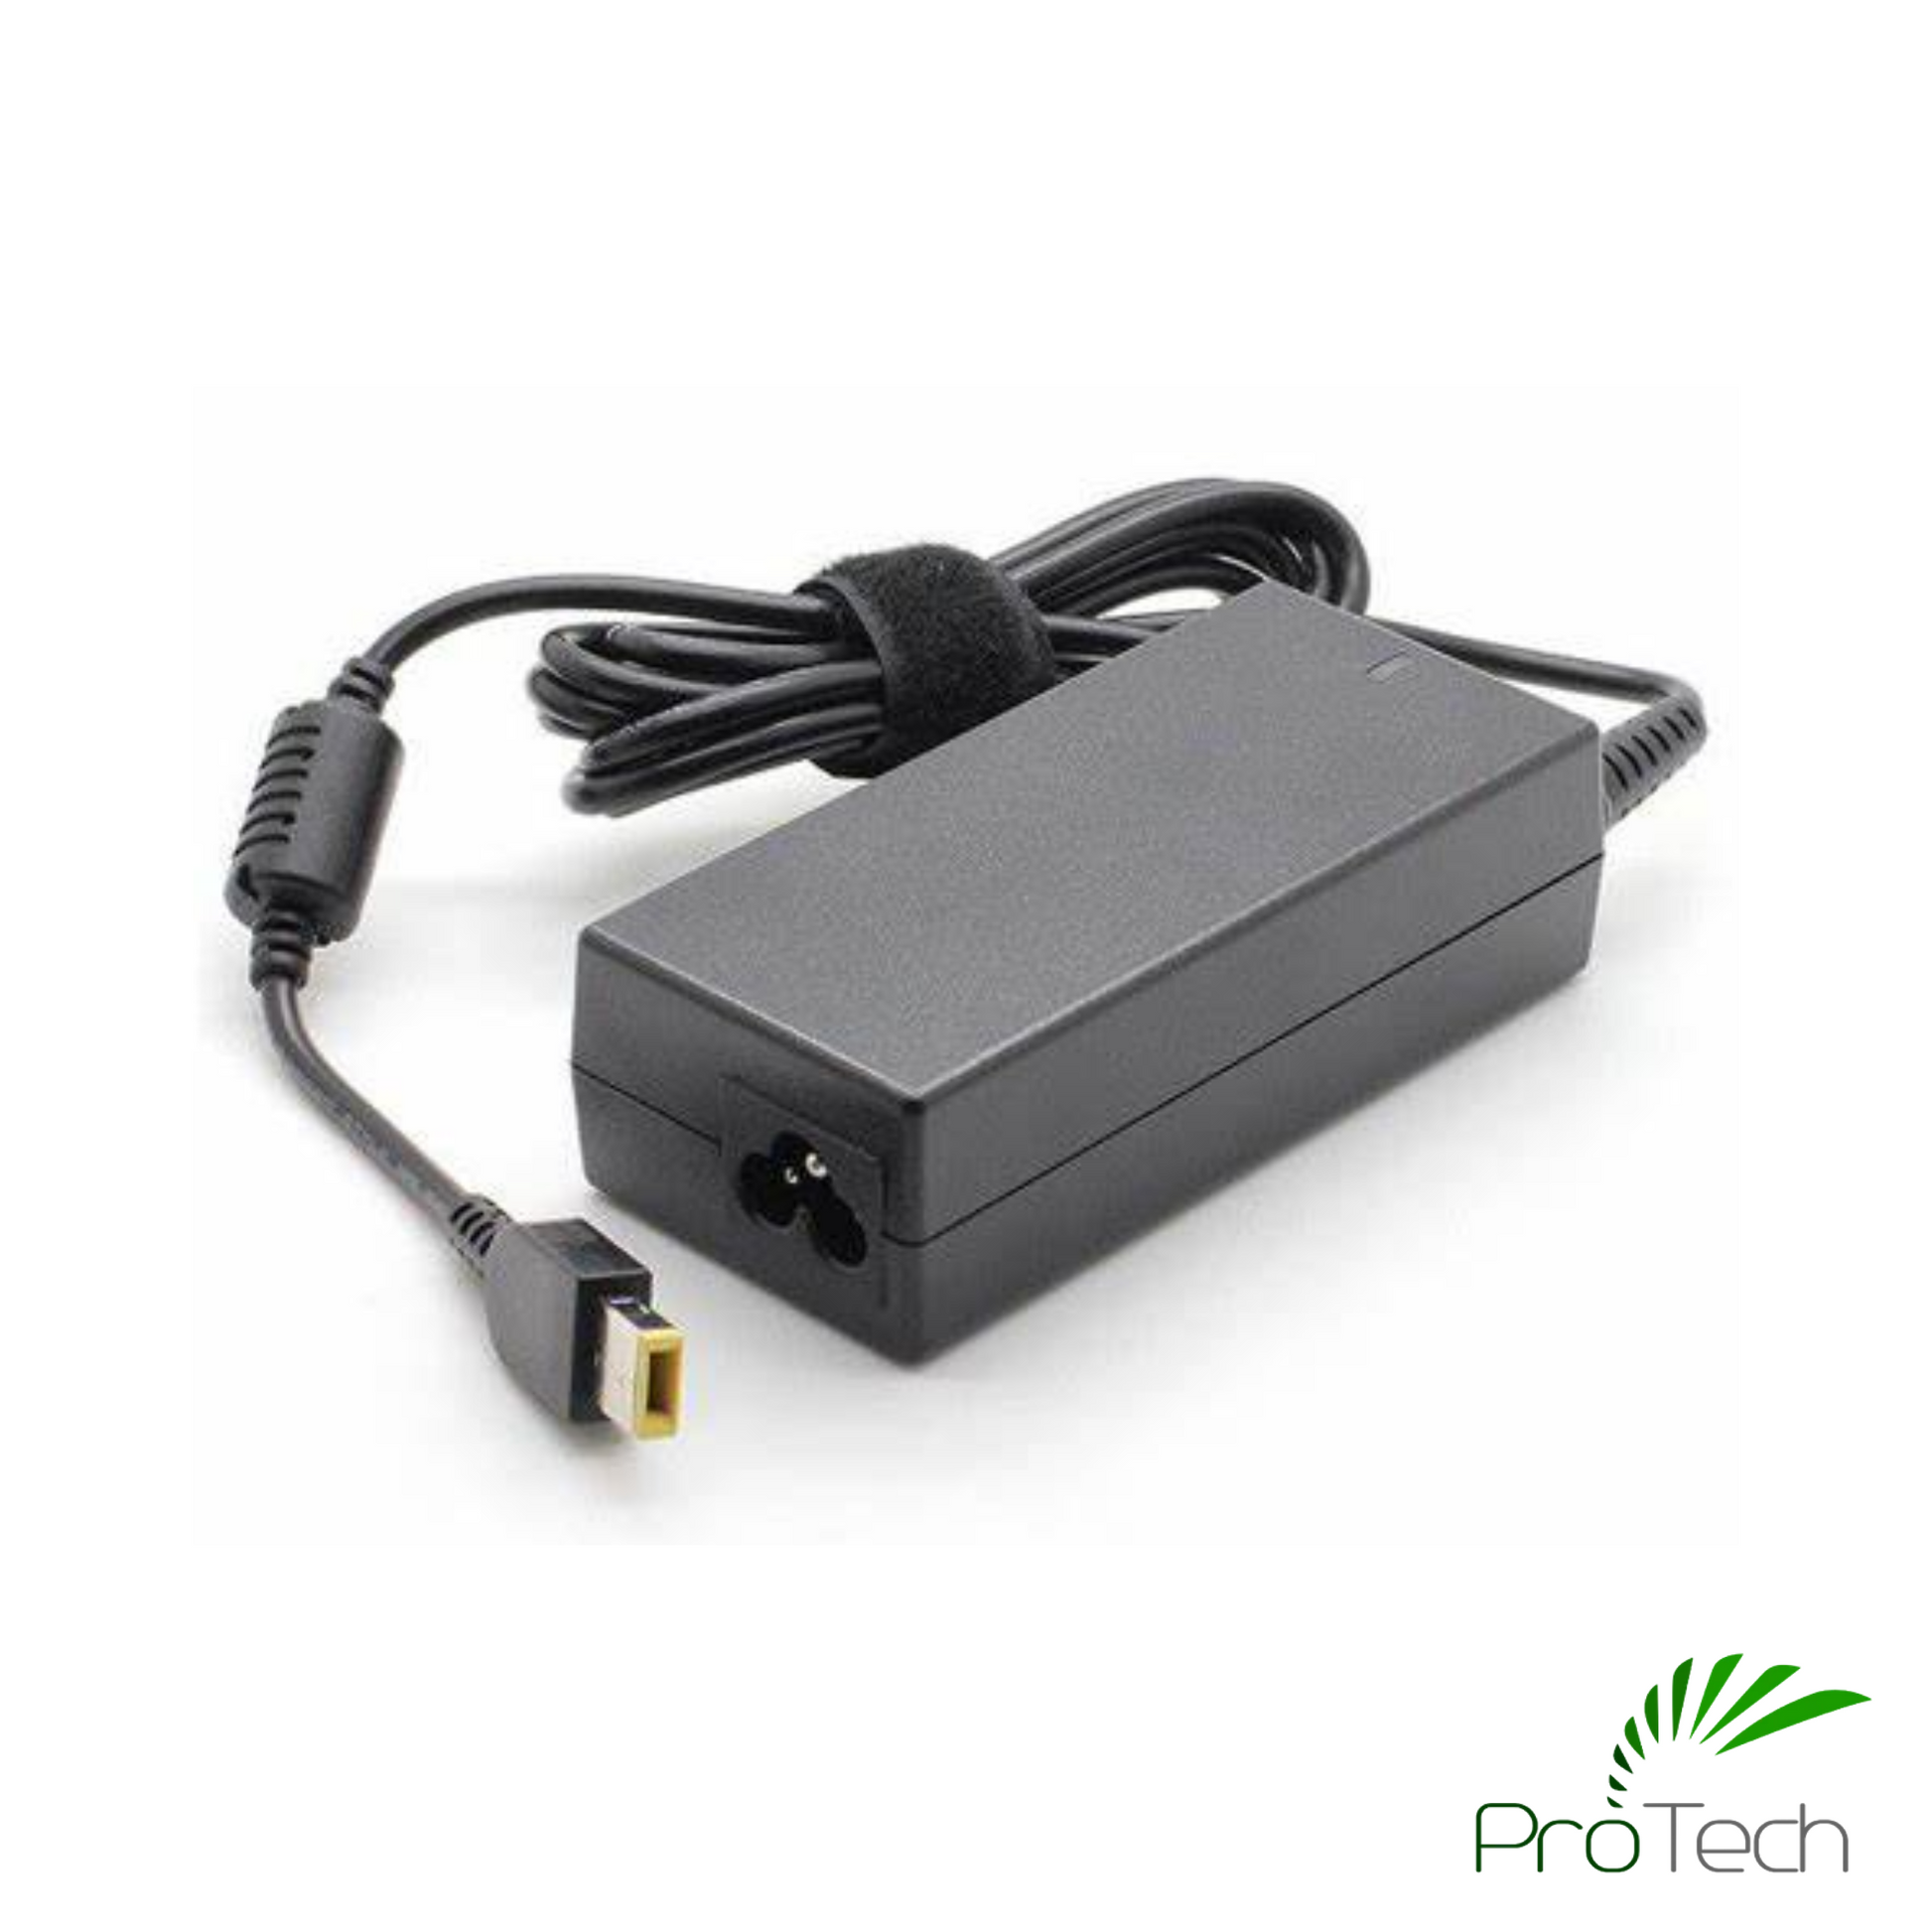 Lenovo Chargers | Assorted ProTech I.T. Solutions